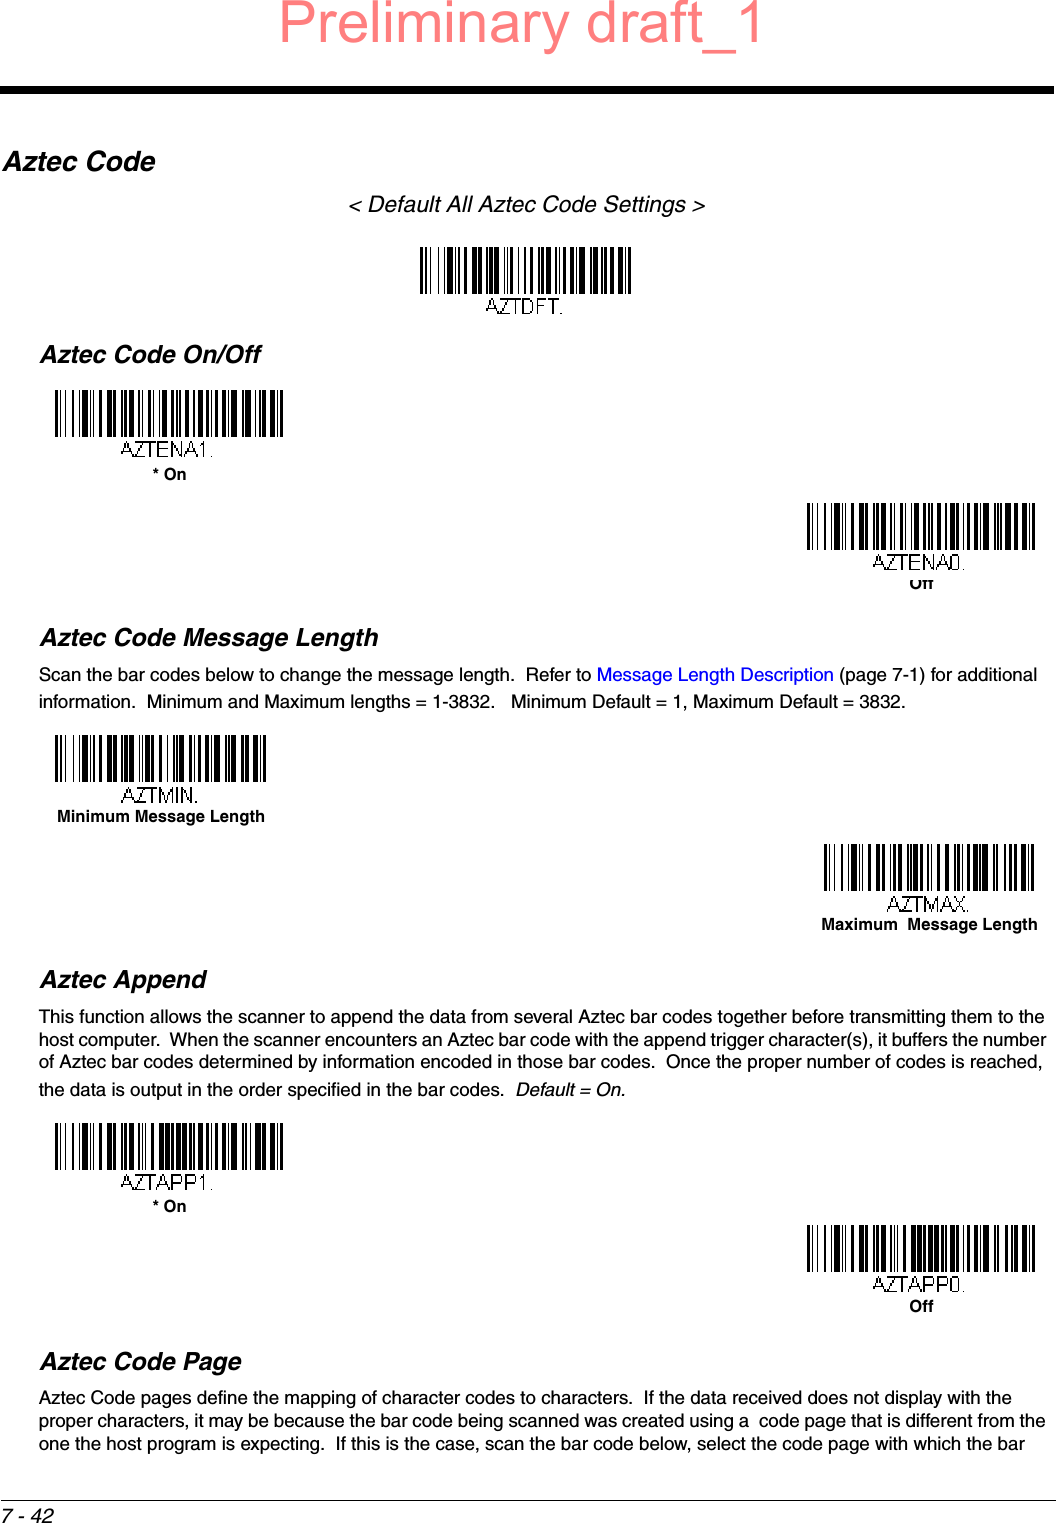 7 - 42Aztec Code&lt; Default All Aztec Code Settings &gt;Aztec Code On/OffAztec Code Message LengthScan the bar codes below to change the message length.  Refer to Message Length Description (page 7-1) for additional information.  Minimum and Maximum lengths = 1-3832.   Minimum Default = 1, Maximum Default = 3832.Aztec AppendThis function allows the scanner to append the data from several Aztec bar codes together before transmitting them to the host computer.  When the scanner encounters an Aztec bar code with the append trigger character(s), it buffers the number of Aztec bar codes determined by information encoded in those bar codes.  Once the proper number of codes is reached, the data is output in the order specified in the bar codes.  Default = On.Aztec Code PageAztec Code pages define the mapping of character codes to characters.  If the data received does not display with the proper characters, it may be because the bar code being scanned was created using a  code page that is different from the one the host program is expecting.  If this is the case, scan the bar code below, select the code page with which the bar * OnOffMinimum Message LengthMaximum  Message Length* OnOffPreliminary draft_1